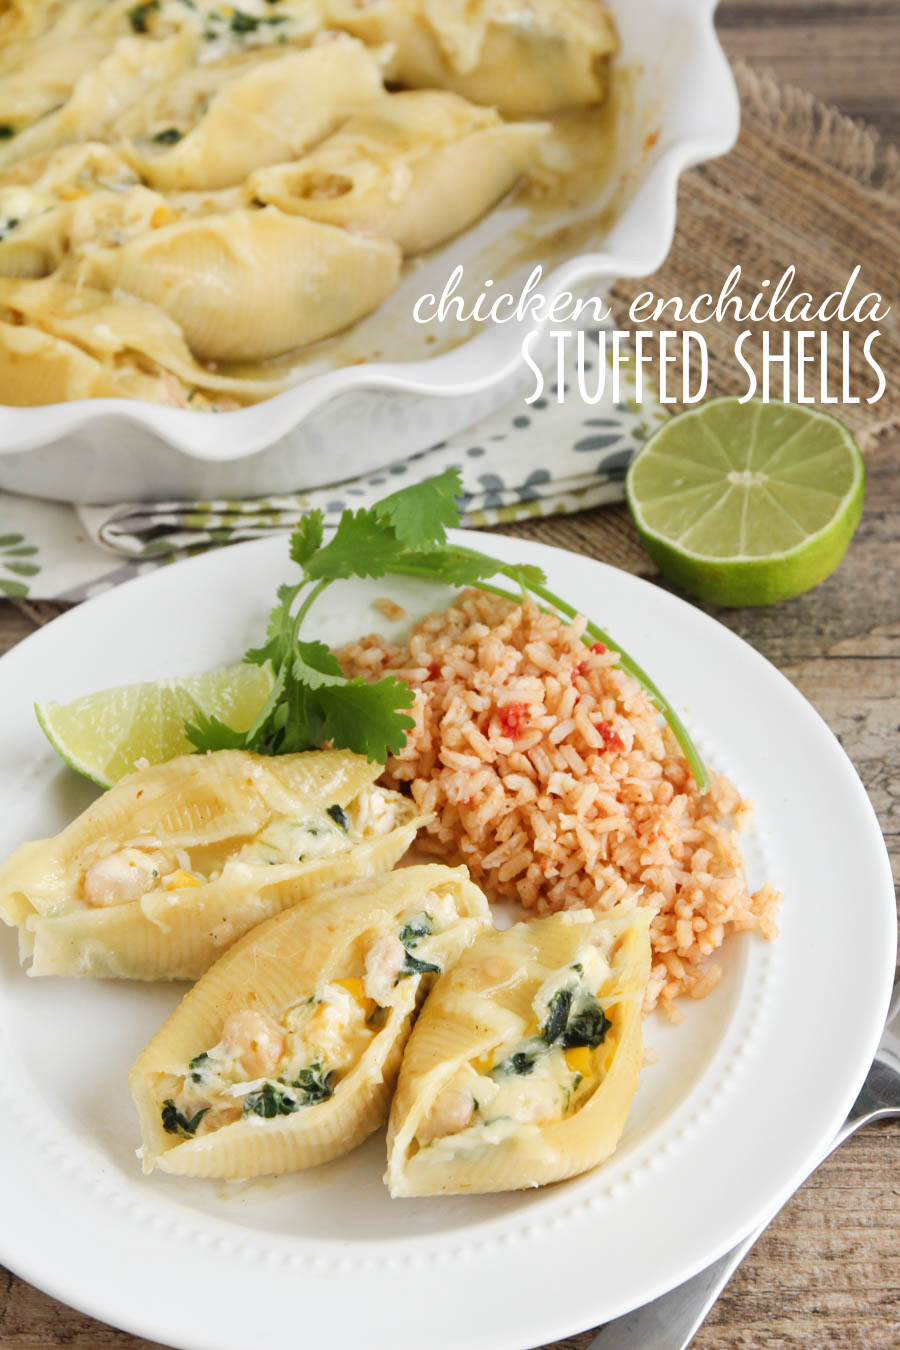 These chicken enchilada stuffed shells are a delicious new twist on an old favorite! So savory and delicious!